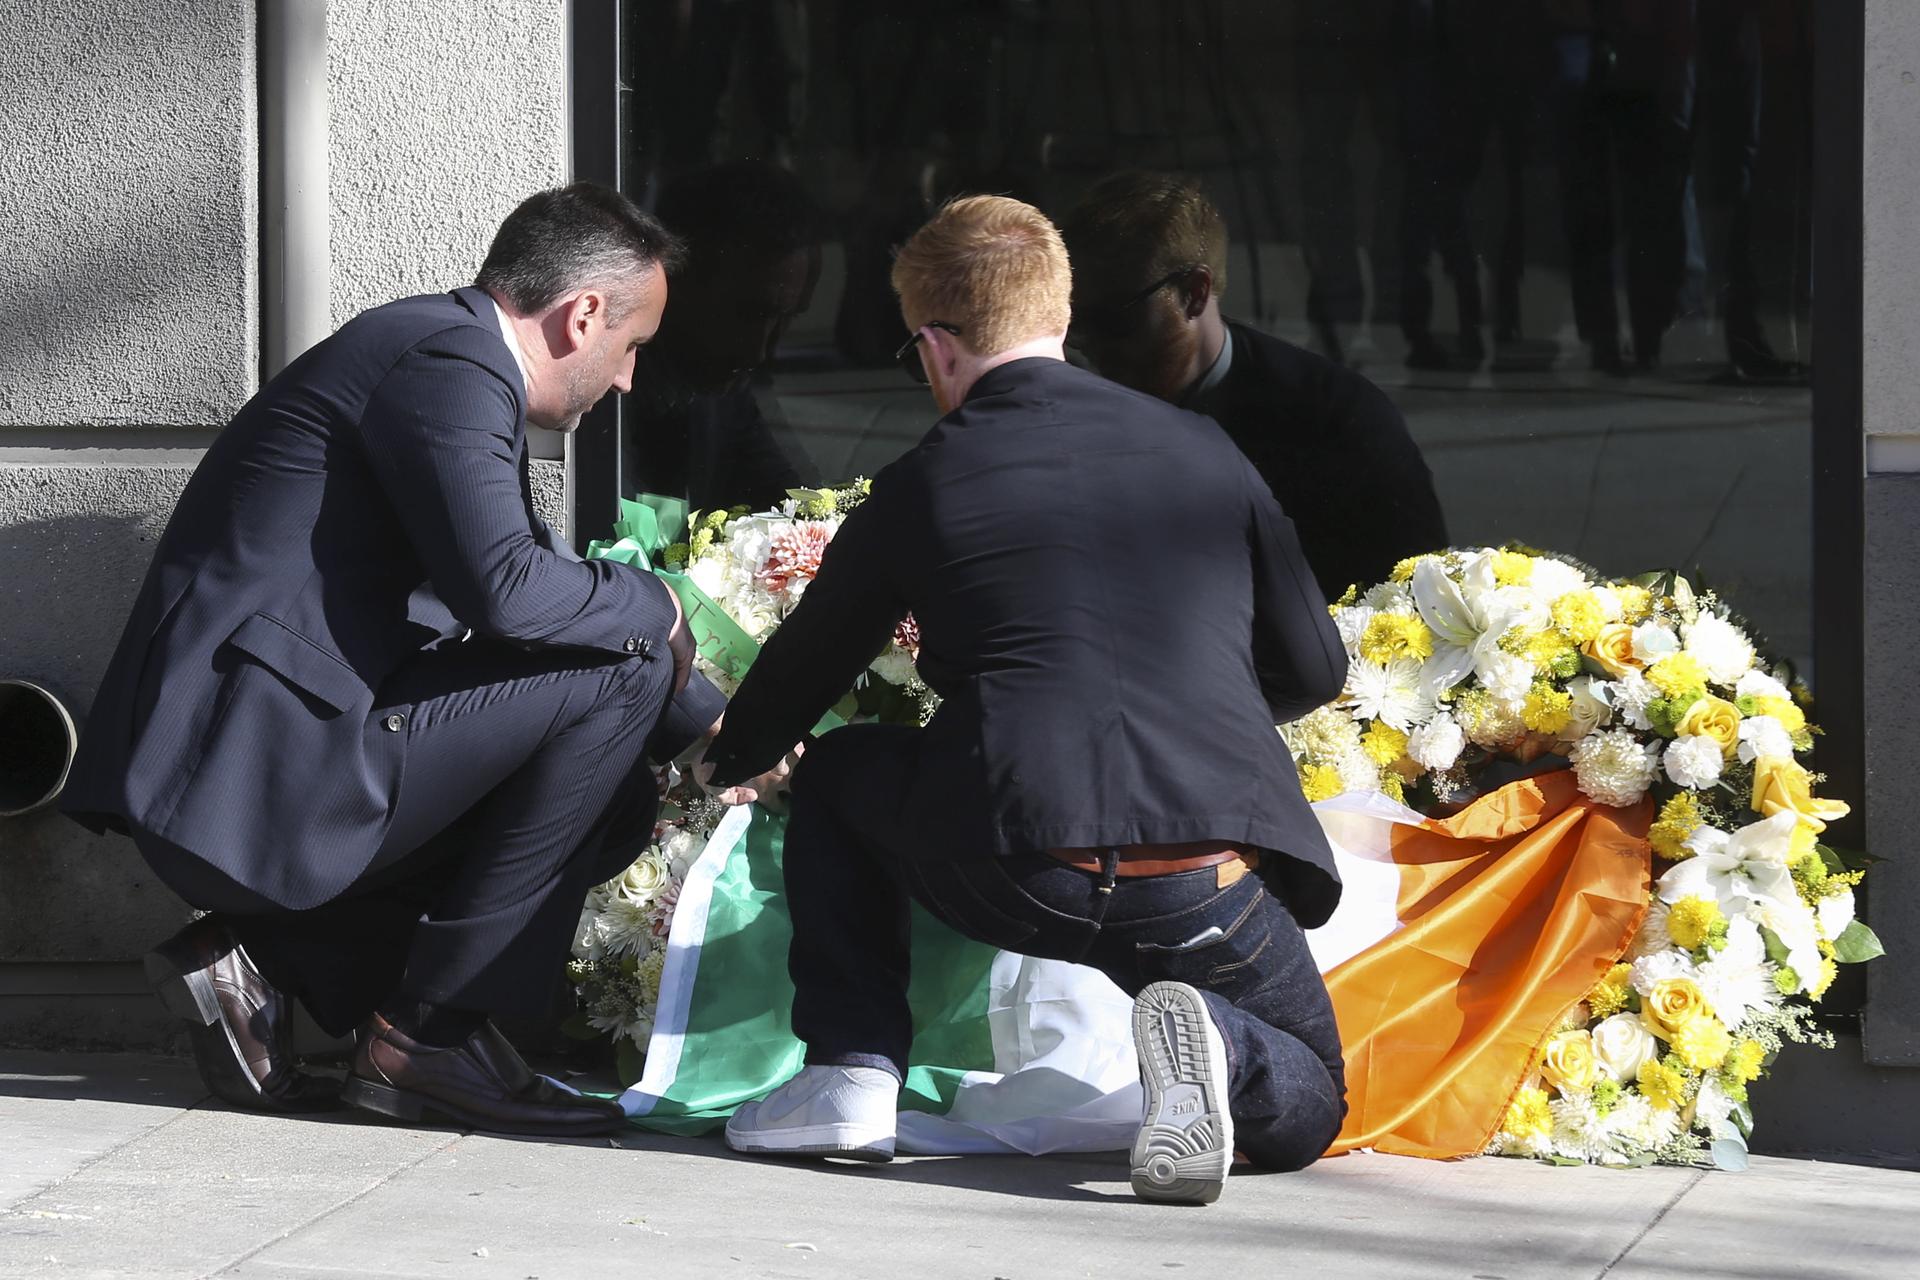 Philip Grant, Consul General of Ireland to the Western United States (L) helps Neil Sands, President of the Irish Network Bay Area, lay an Irish flag atop two wreaths at the scene of a 4th-story apartment building balcony collapse in Berkeley, California.